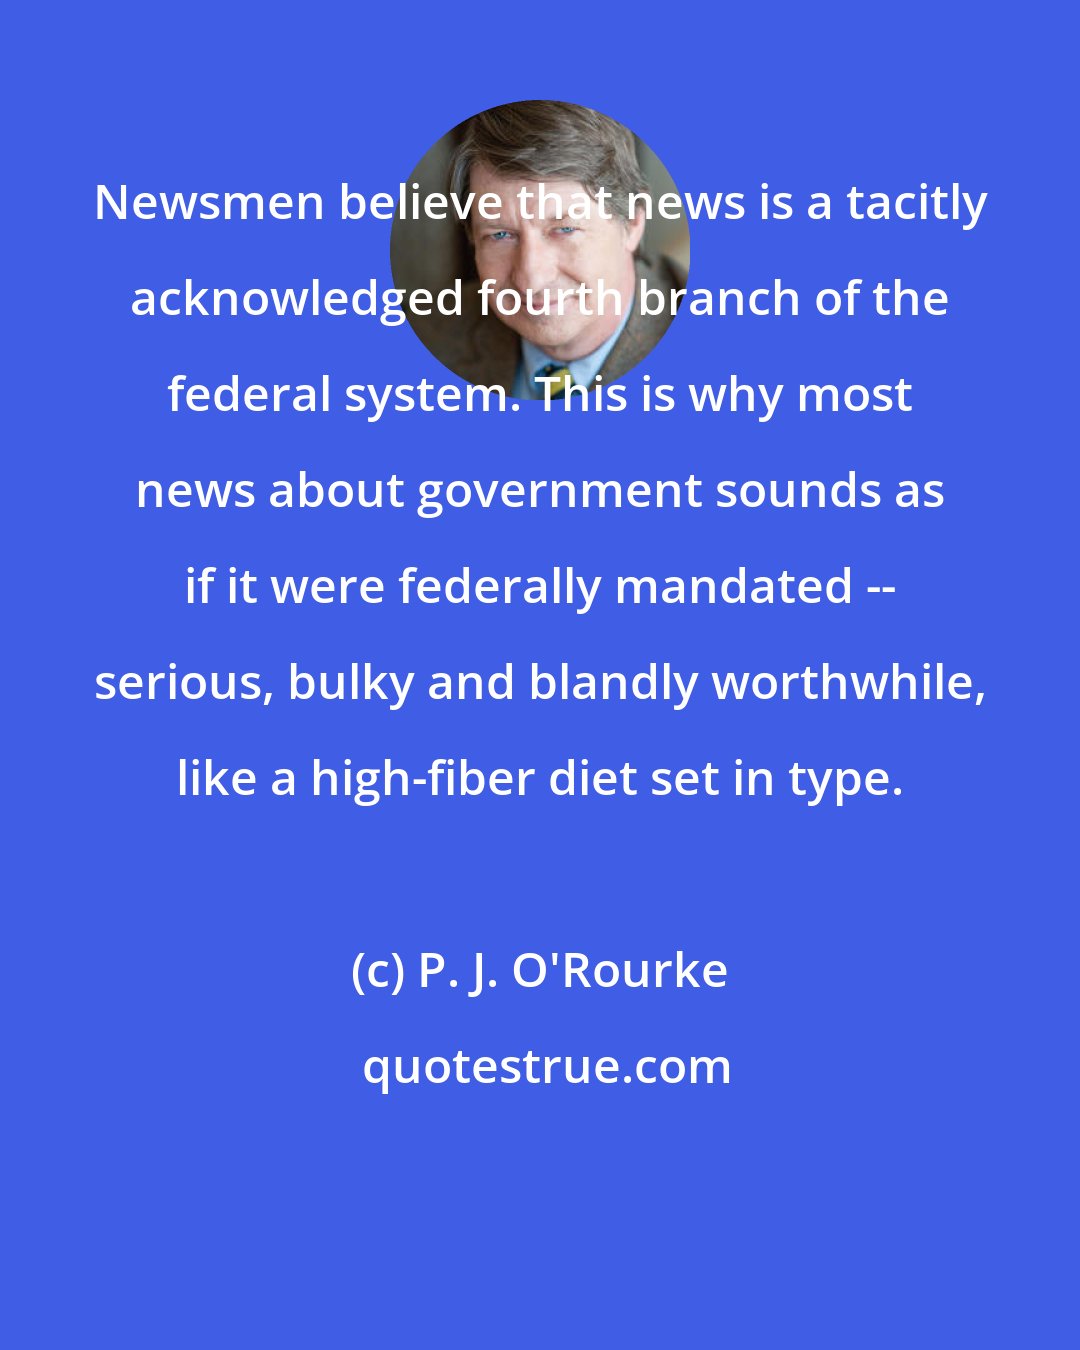 P. J. O'Rourke: Newsmen believe that news is a tacitly acknowledged fourth branch of the federal system. This is why most news about government sounds as if it were federally mandated -- serious, bulky and blandly worthwhile, like a high-fiber diet set in type.